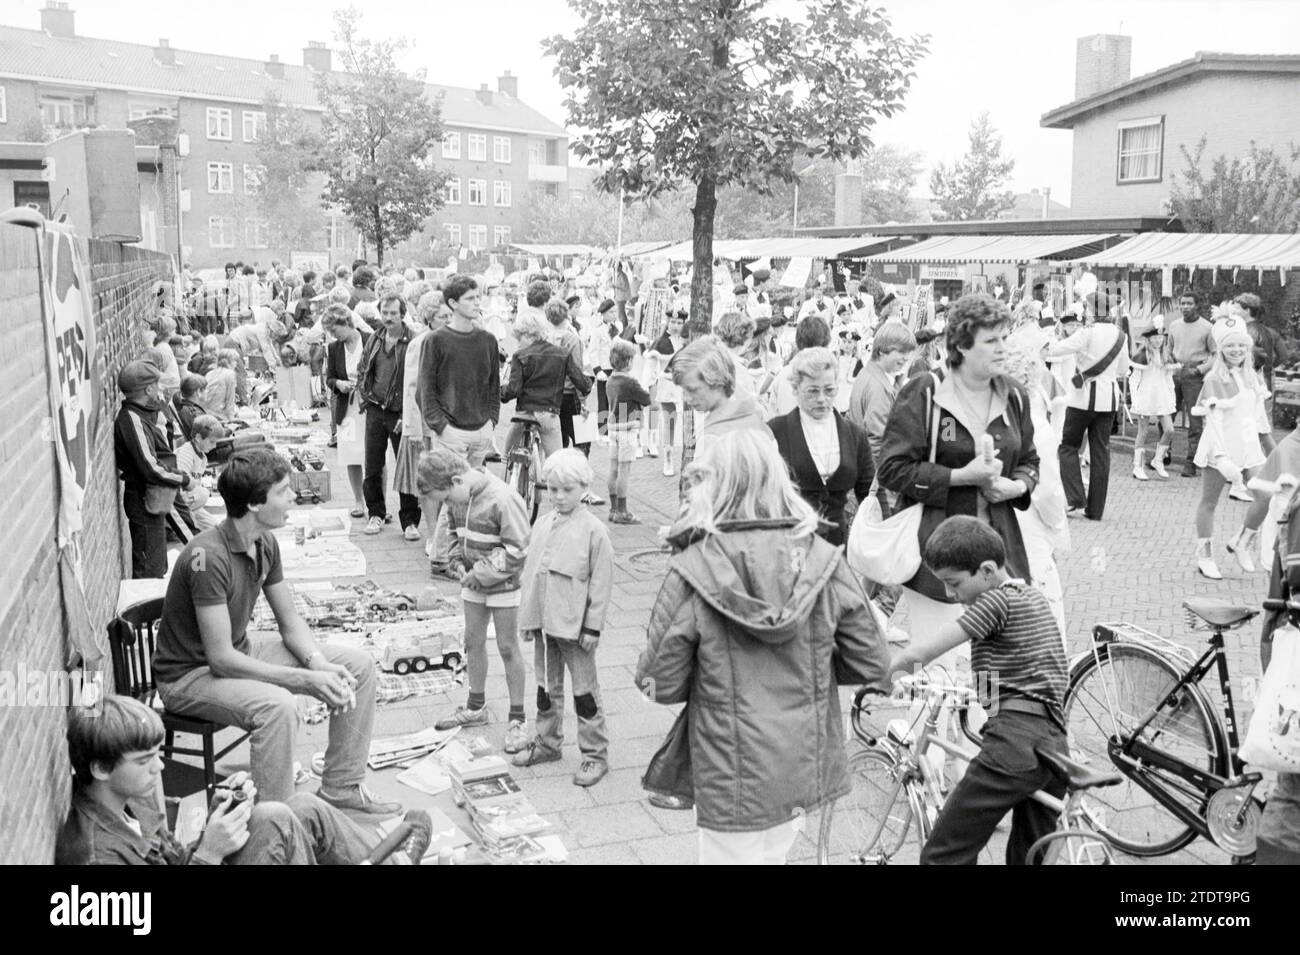 Leisure market, De Planete community center, IJmuiden, Market, IJmuiden, The Netherlands, 04-09-1982, Whizgle News from the Past, Tailored for the Future. Explore historical narratives, Dutch The Netherlands agency image with a modern perspective, bridging the gap between yesterday's events and tomorrow's insights. A timeless journey shaping the stories that shape our future Stock Photo